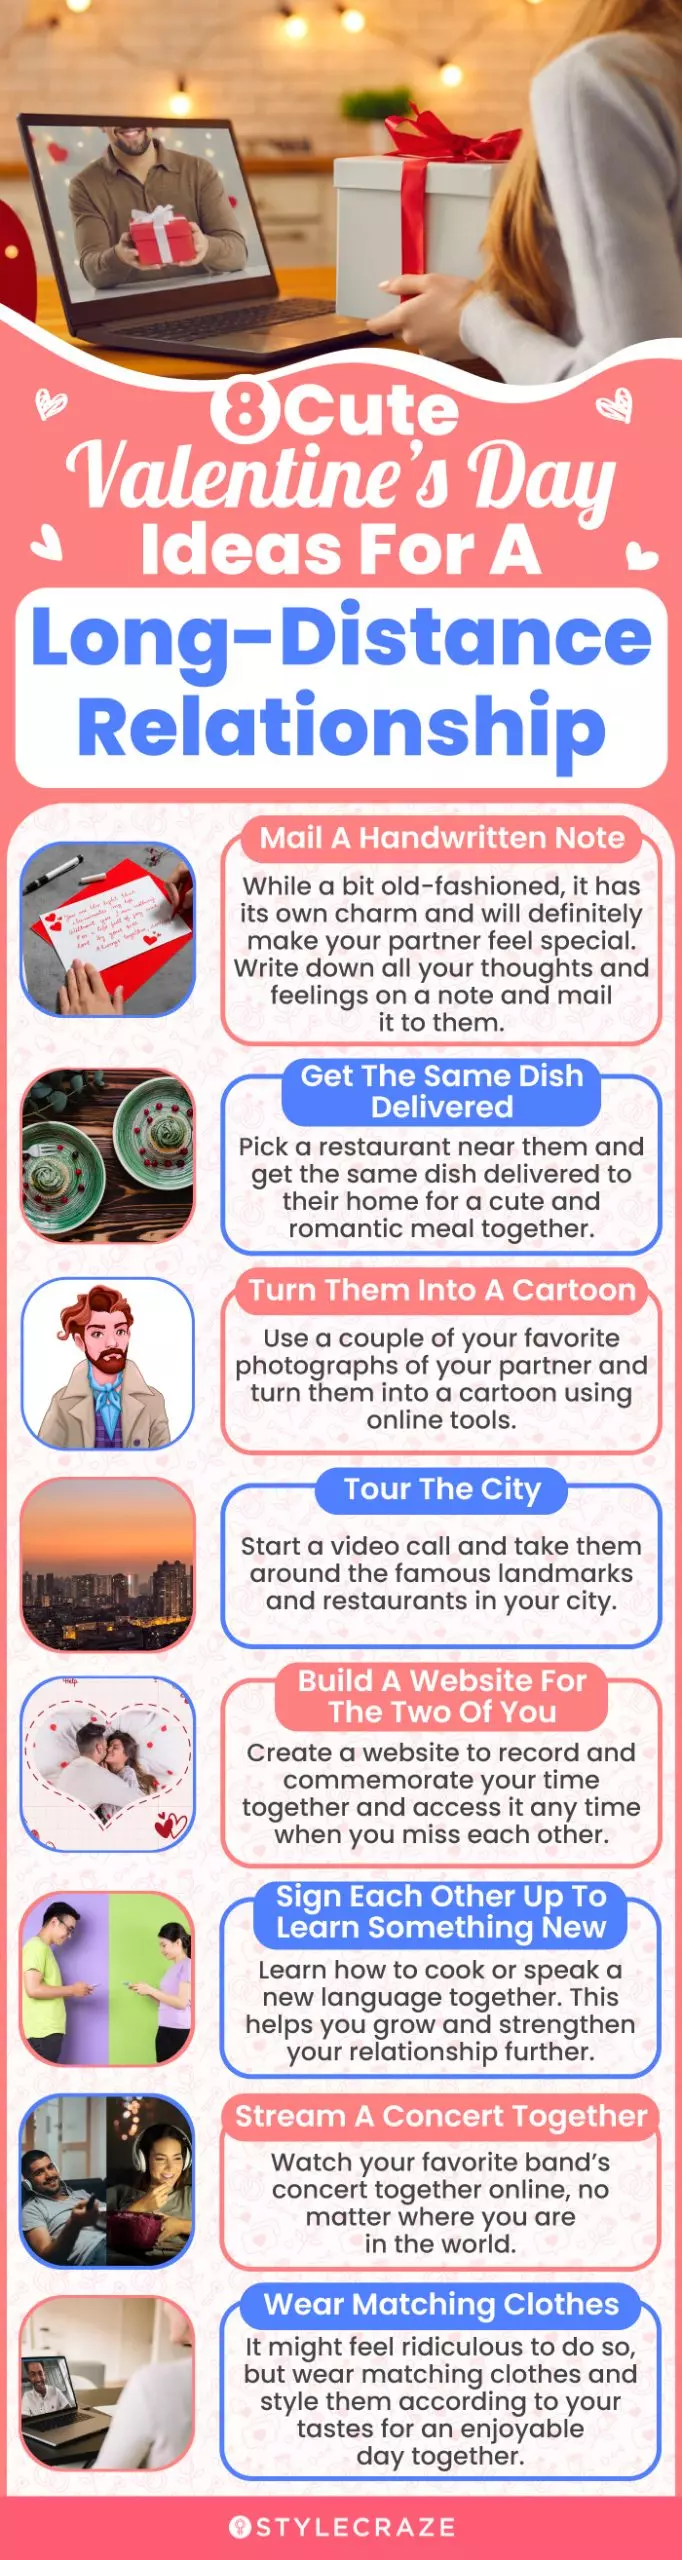 8 cute valentine’s day ideas for a long distance relationship (infographic)